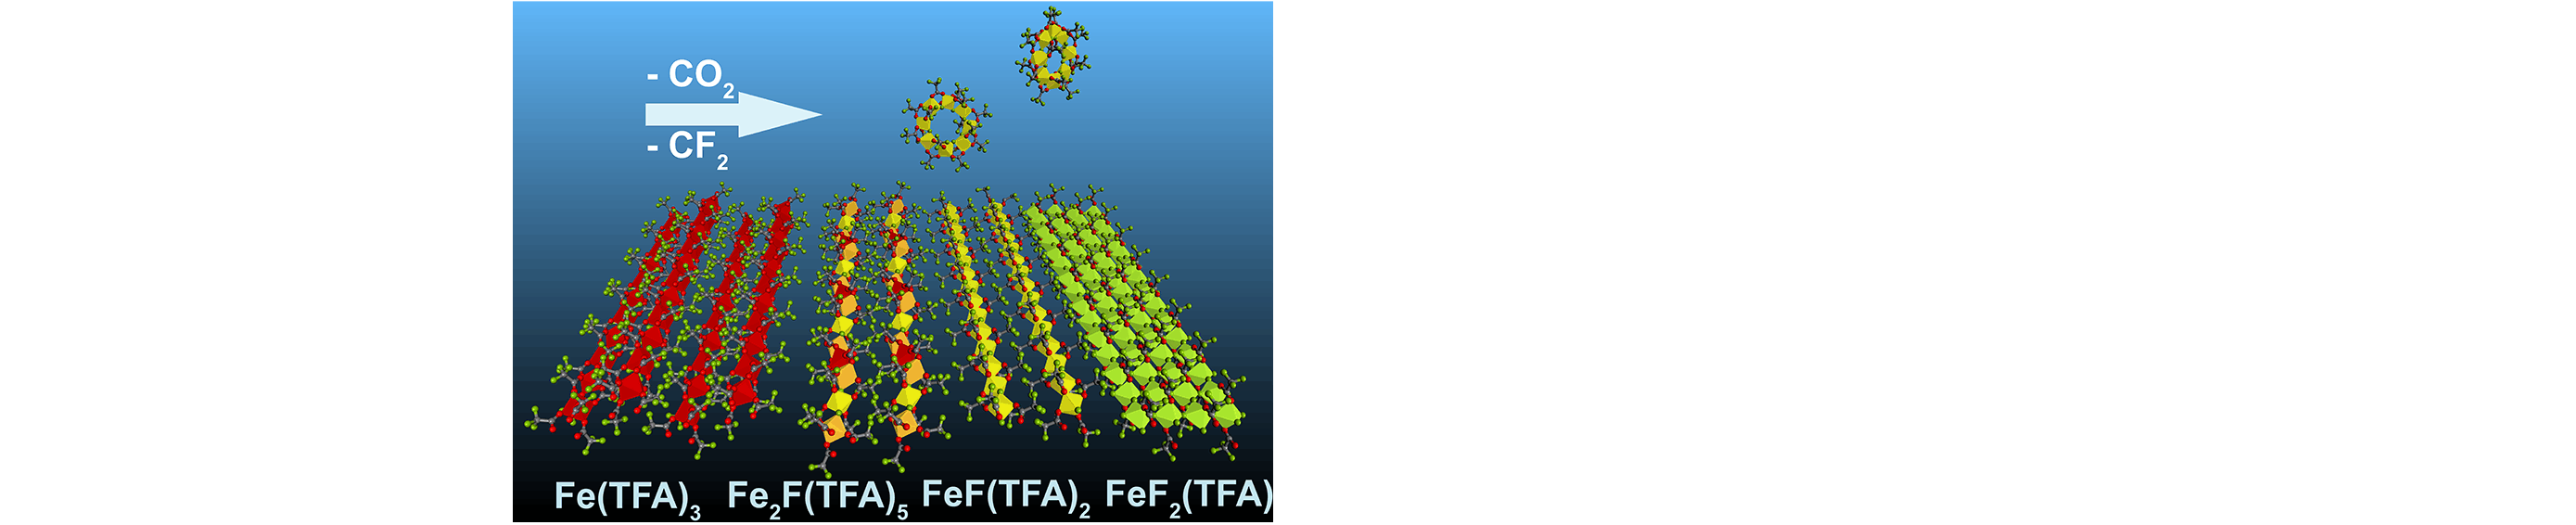 Structural Evolution of Iron(III) Trifluoroacetate Upon Thermal Decomposition: Chains, Layers and Rings